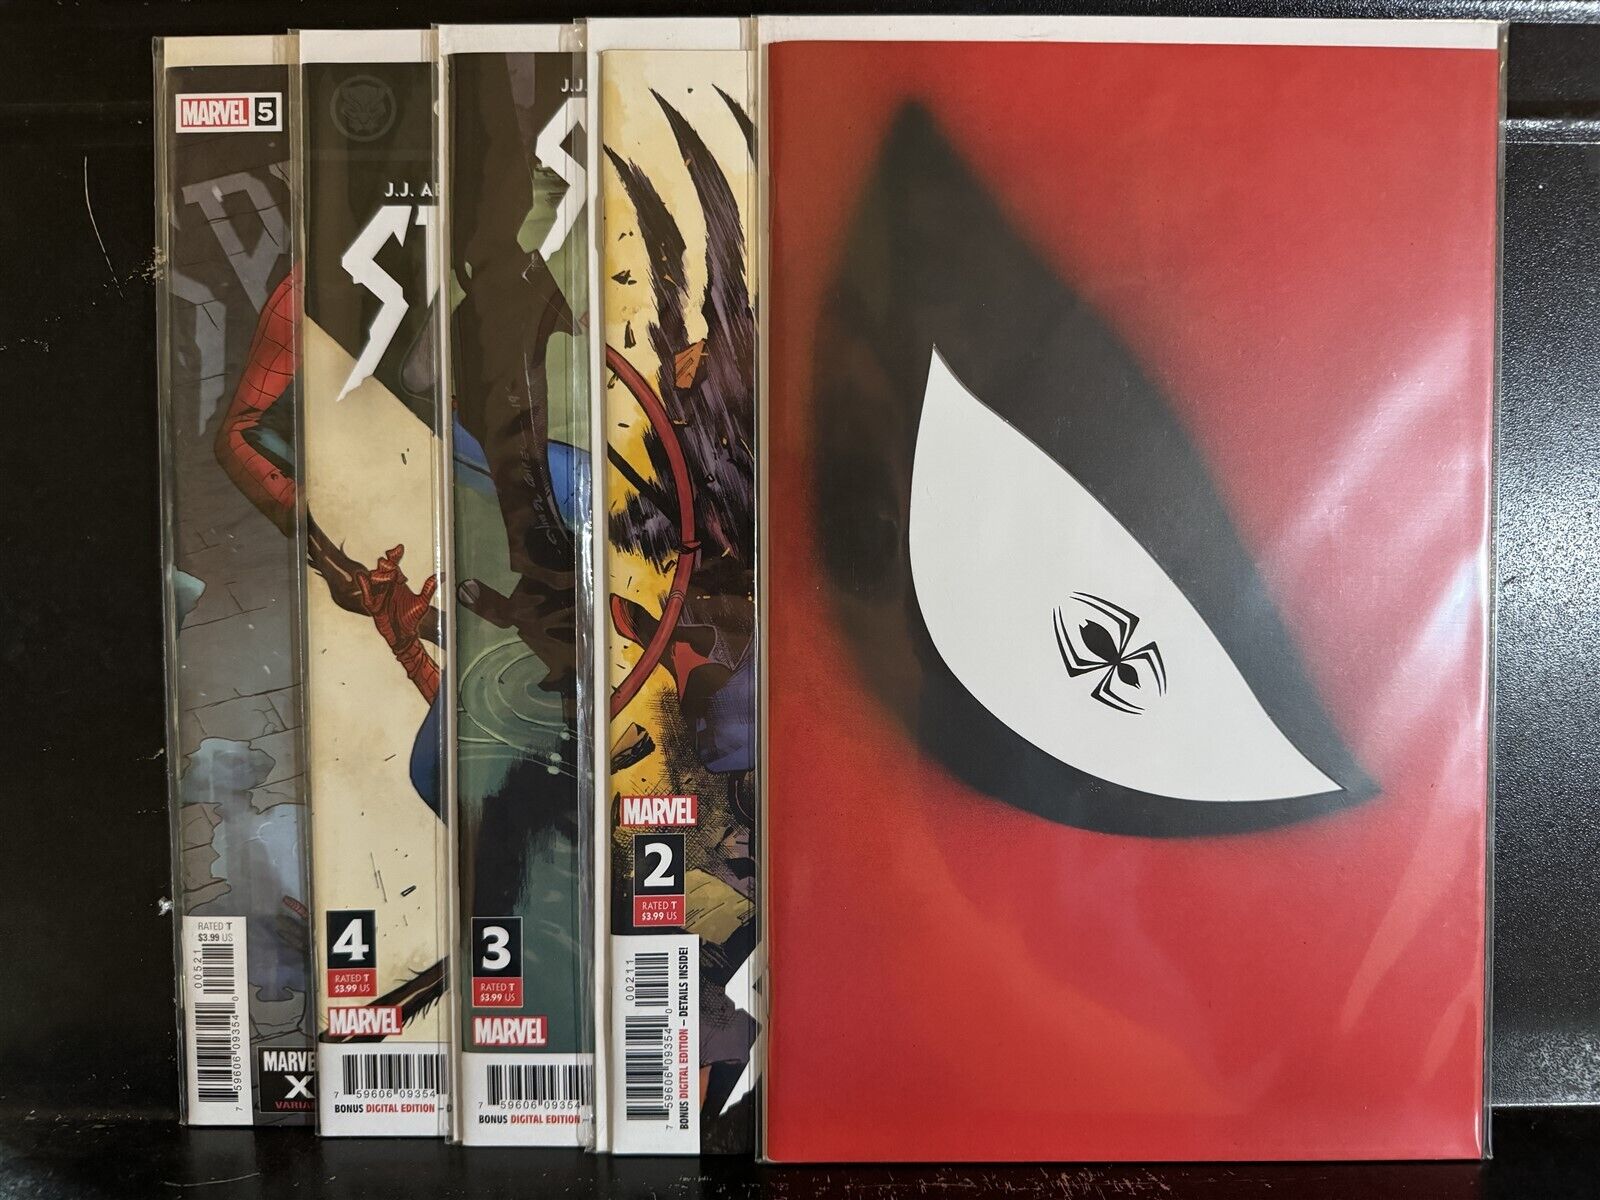 COMPLETE Spider-Man #1 2 3 4 5 (2019 Marvel) JJ Abrams - Free Combine Shipping